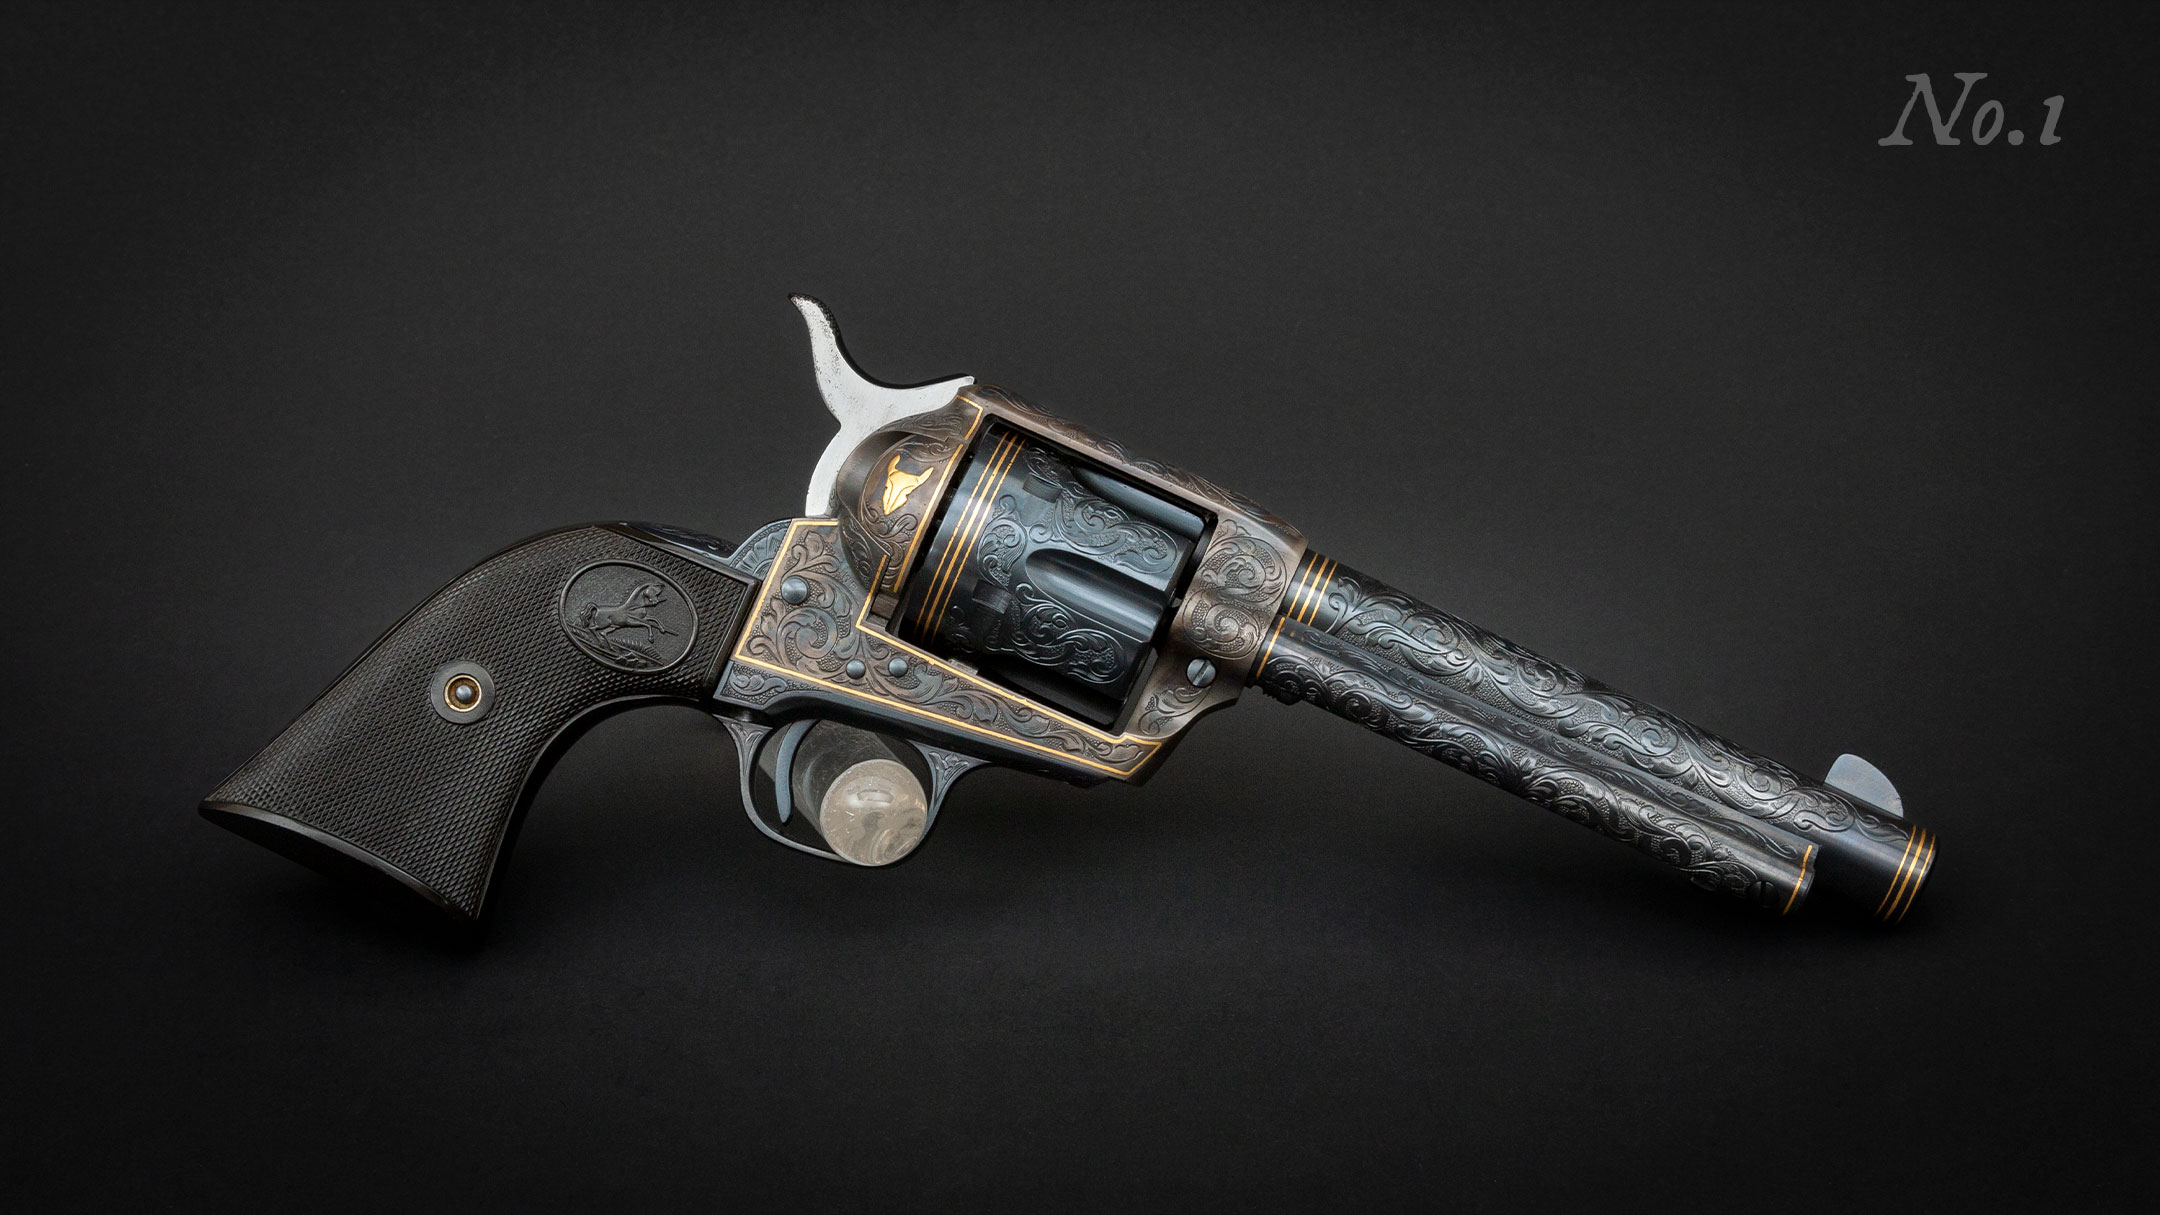 First of a consecutive-numbered pair of 2nd Generation, Bledsoe-engraved, Colt Single Action Army revolvers, restored and for sale by Turnbull Restoration of Bloomfield, NY